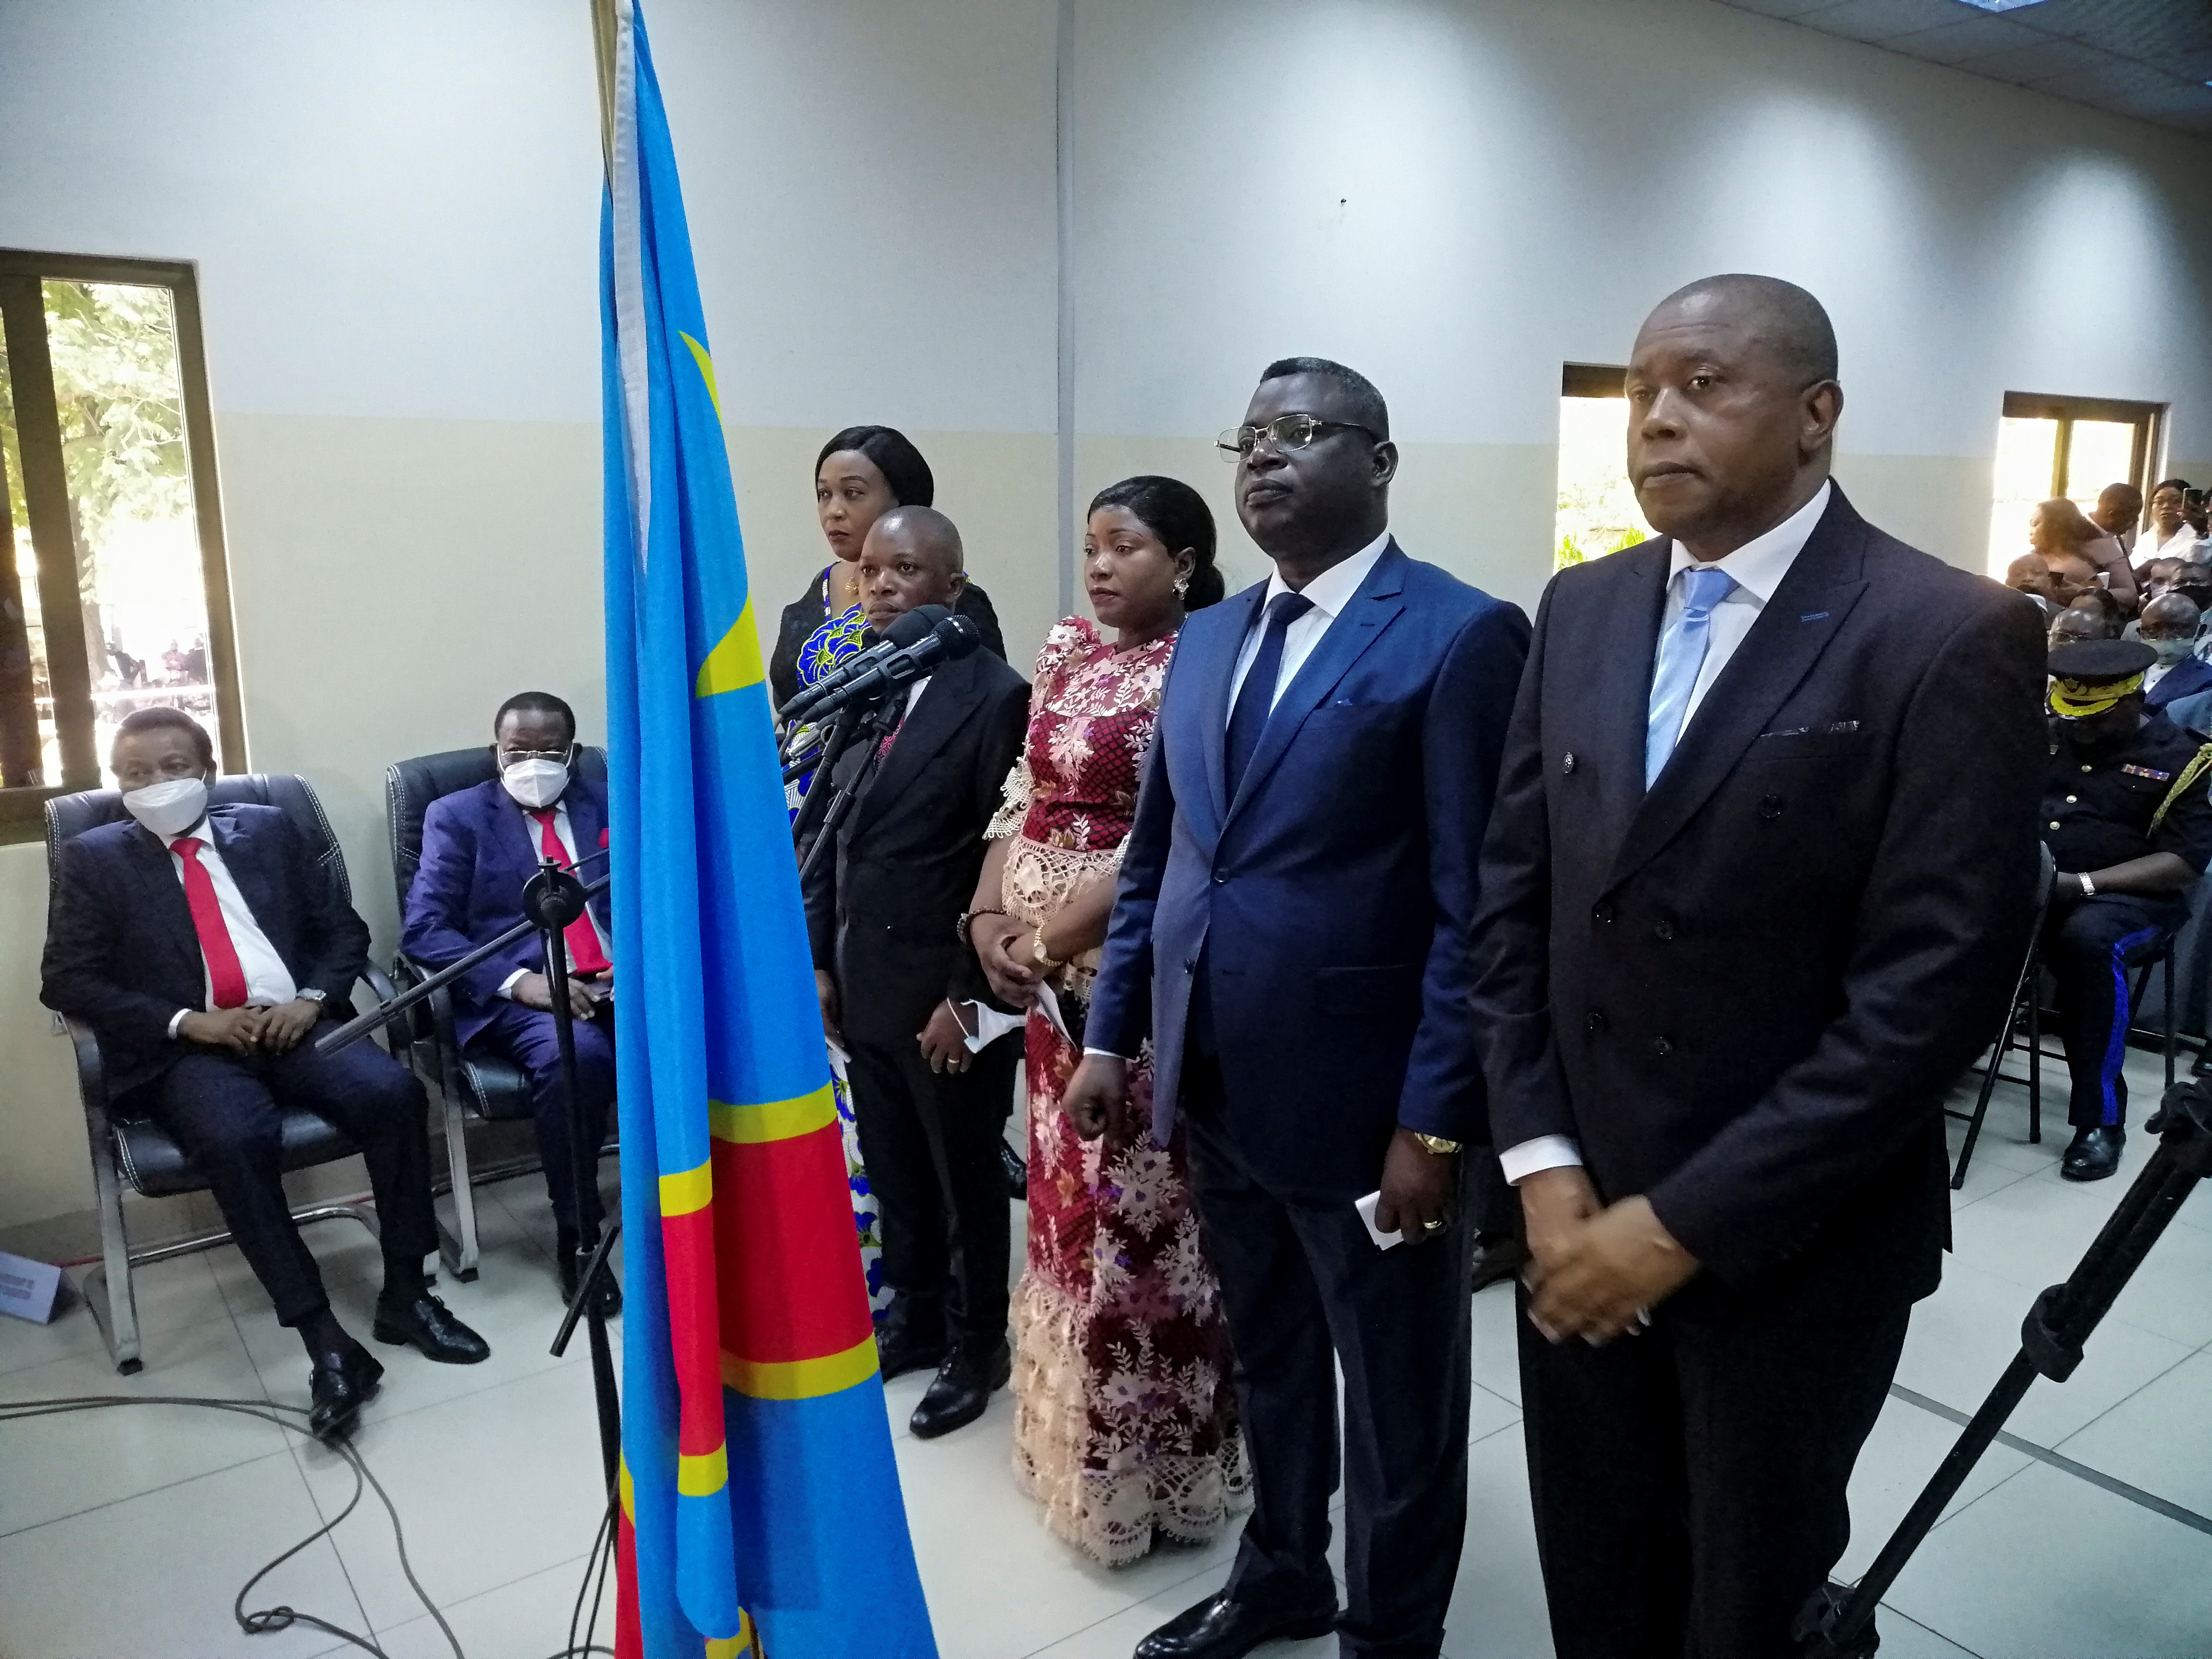 opDenis Kadima, new President of the Independent National Electoral Commission of the Democratic Republic of the Congo attends the swearing-in ceremony at the constitutional court in Kinshasa